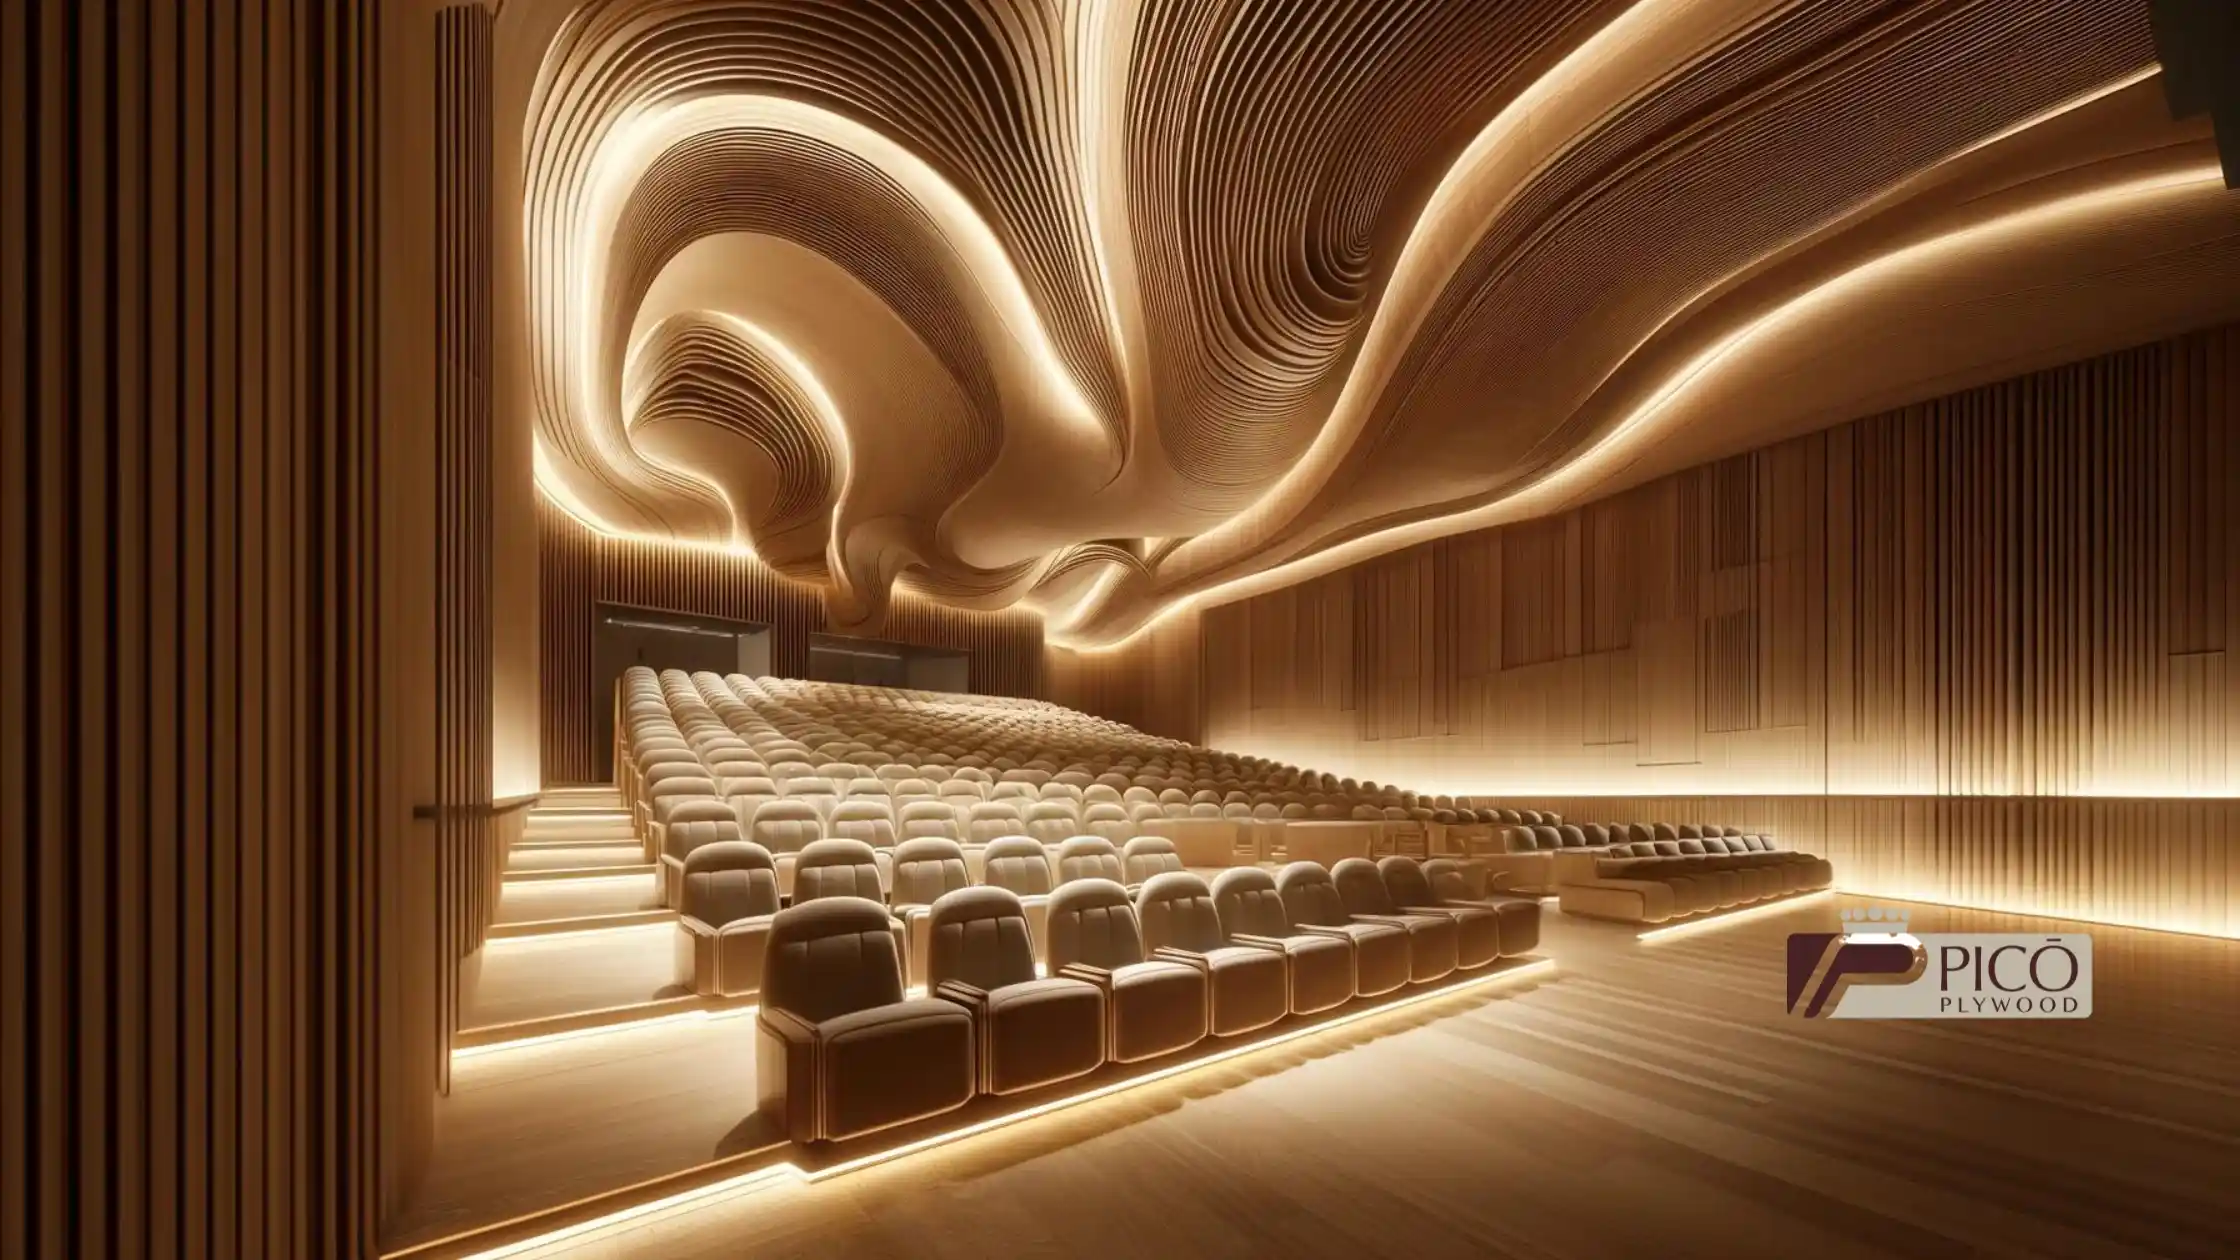 Plywood Supplier • Picó Plywood • Blog • Flexible Plywood Uses Theater